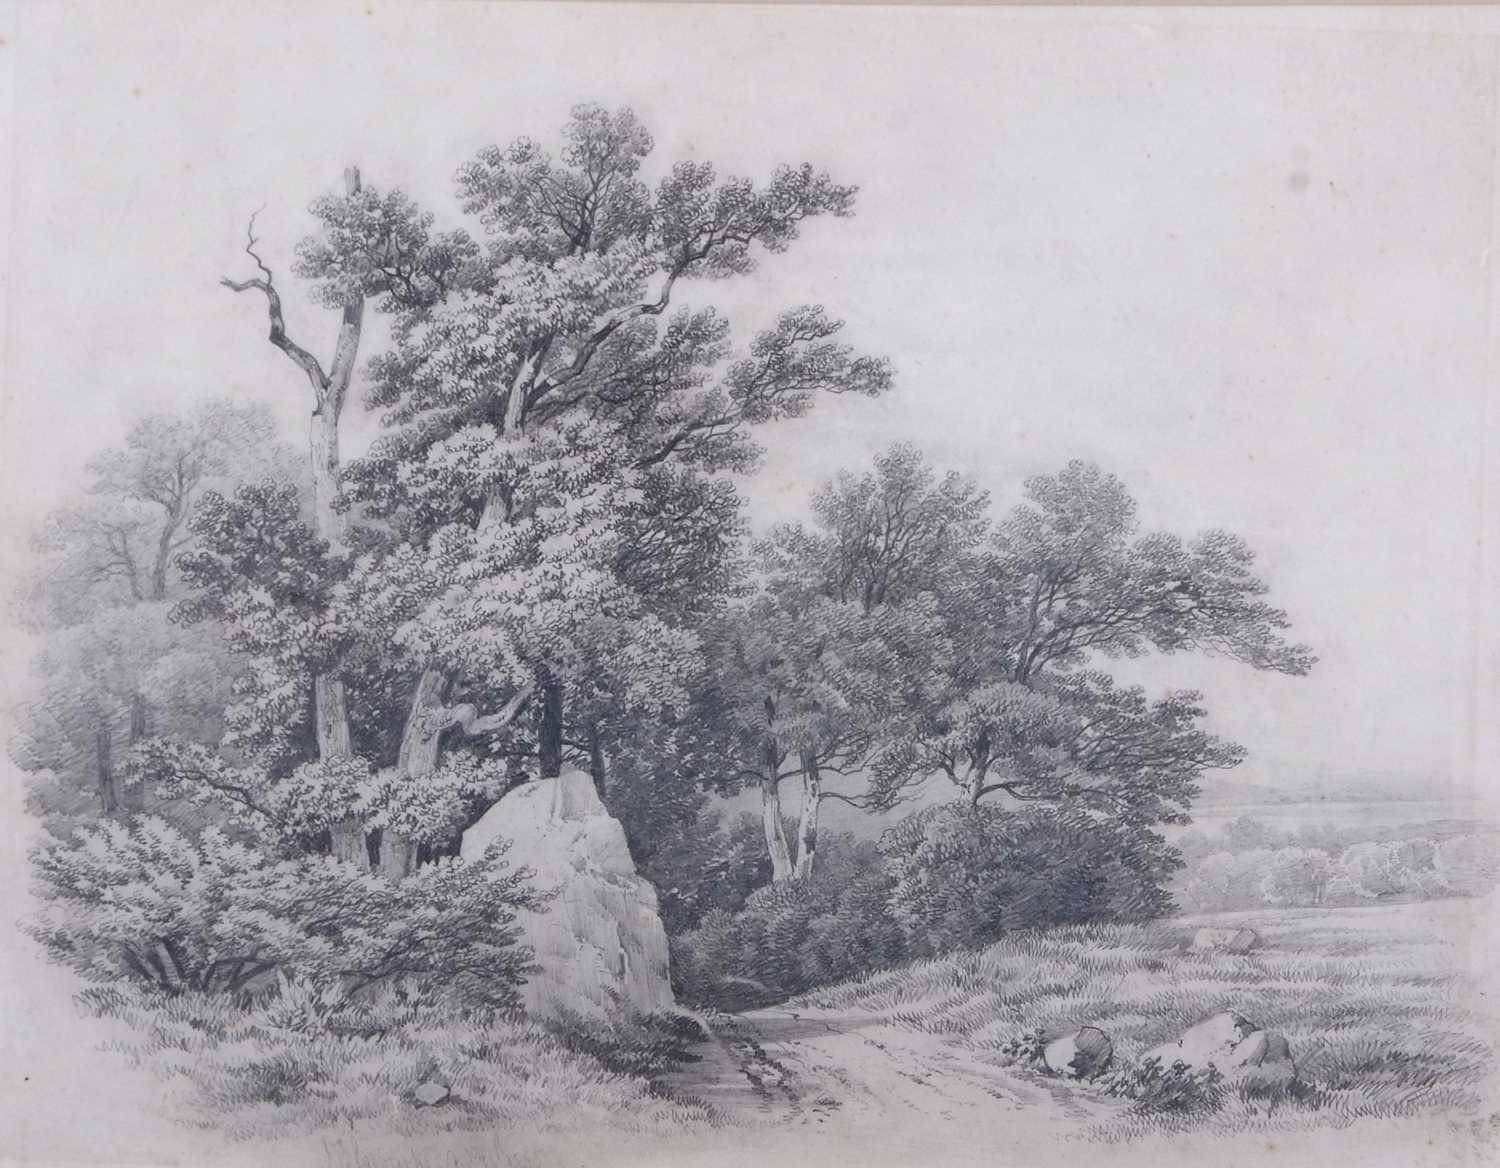 John Berney Ladbrooke (1803-1879), Wooded Landscape, pencil on paper, signed and dated 1855, - Image 3 of 3